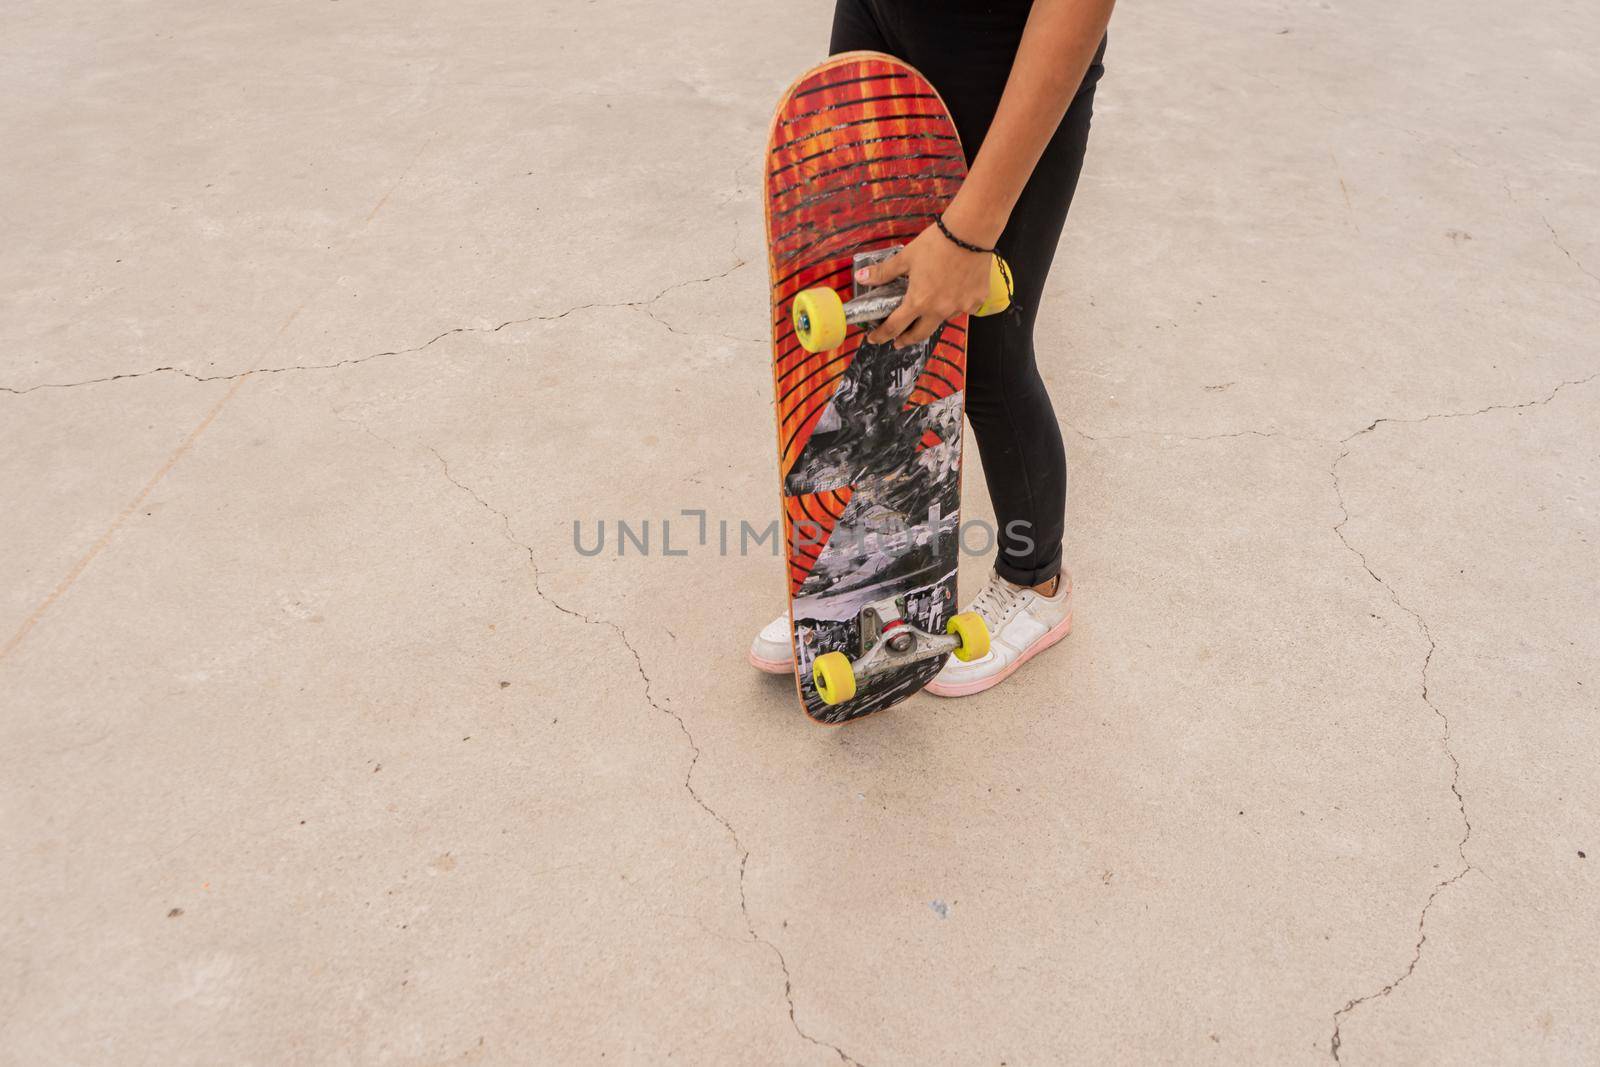 Unrecognizable latina teenage female skater holding a board about to do stunts in Managua Nicaragua